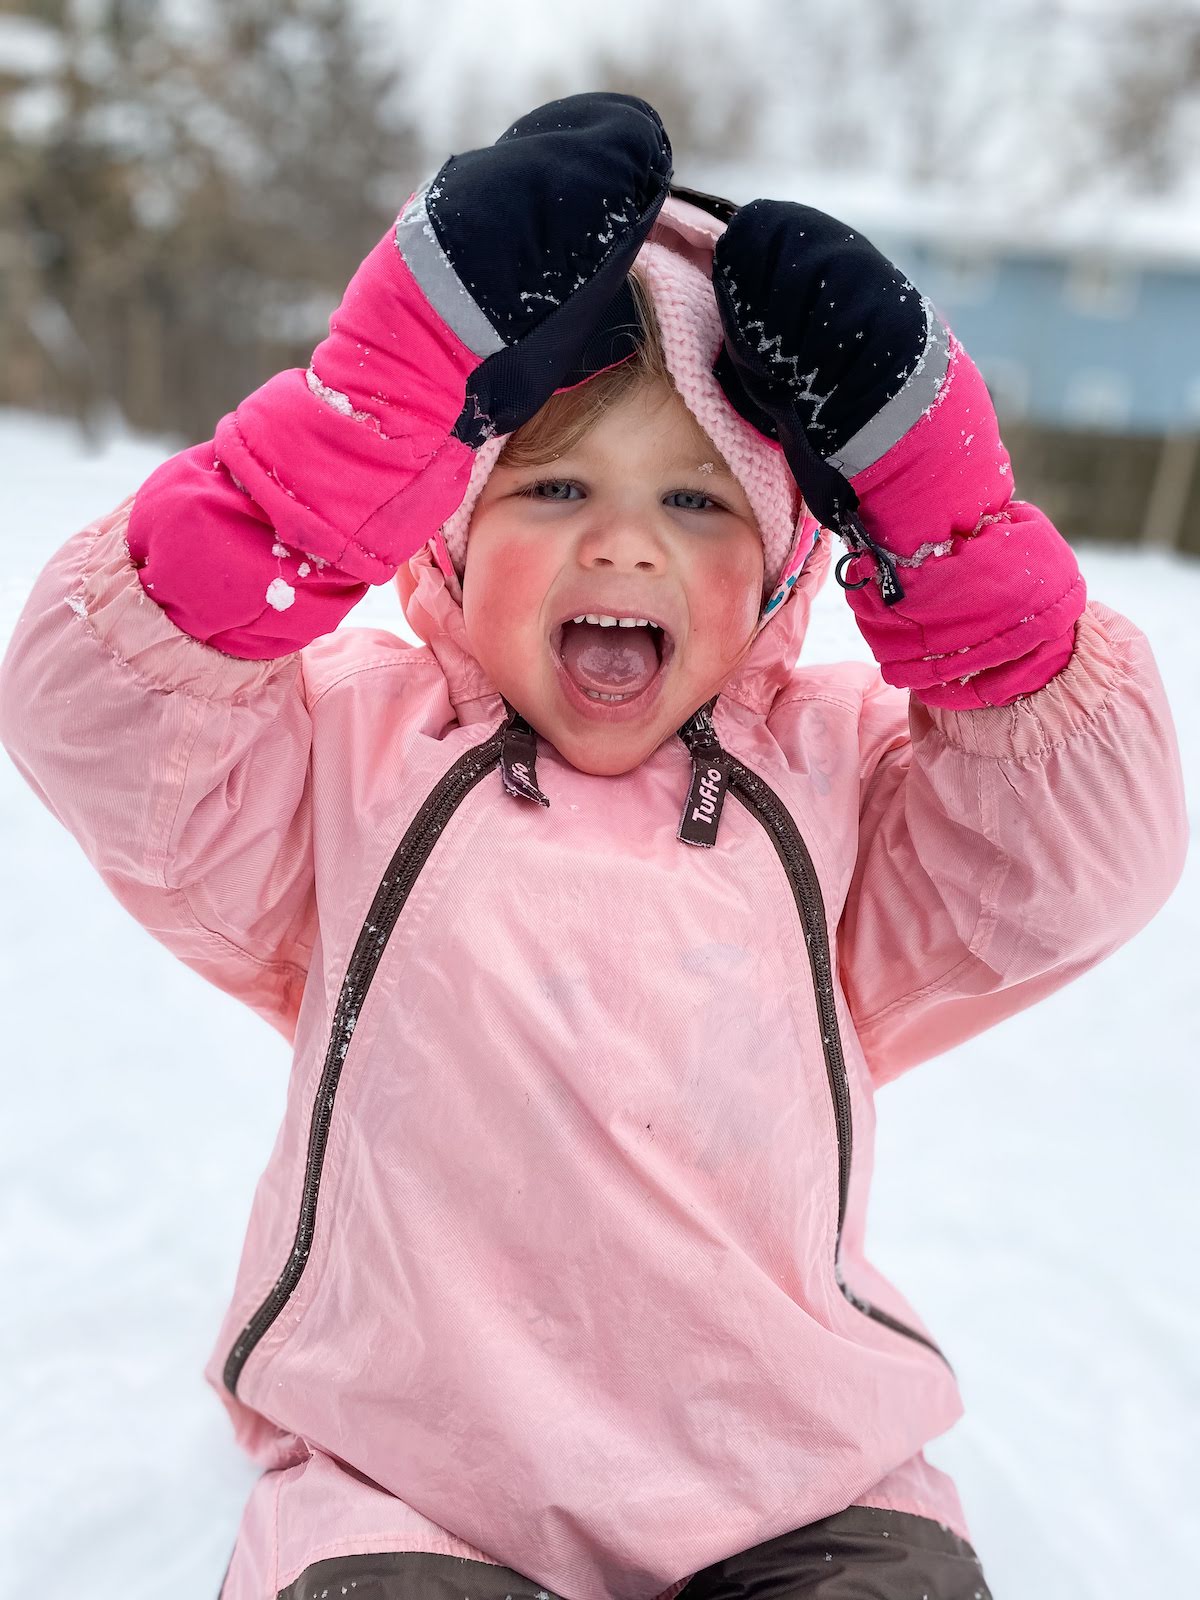 little girl in pink snowsuit and mittens playing in the snow.